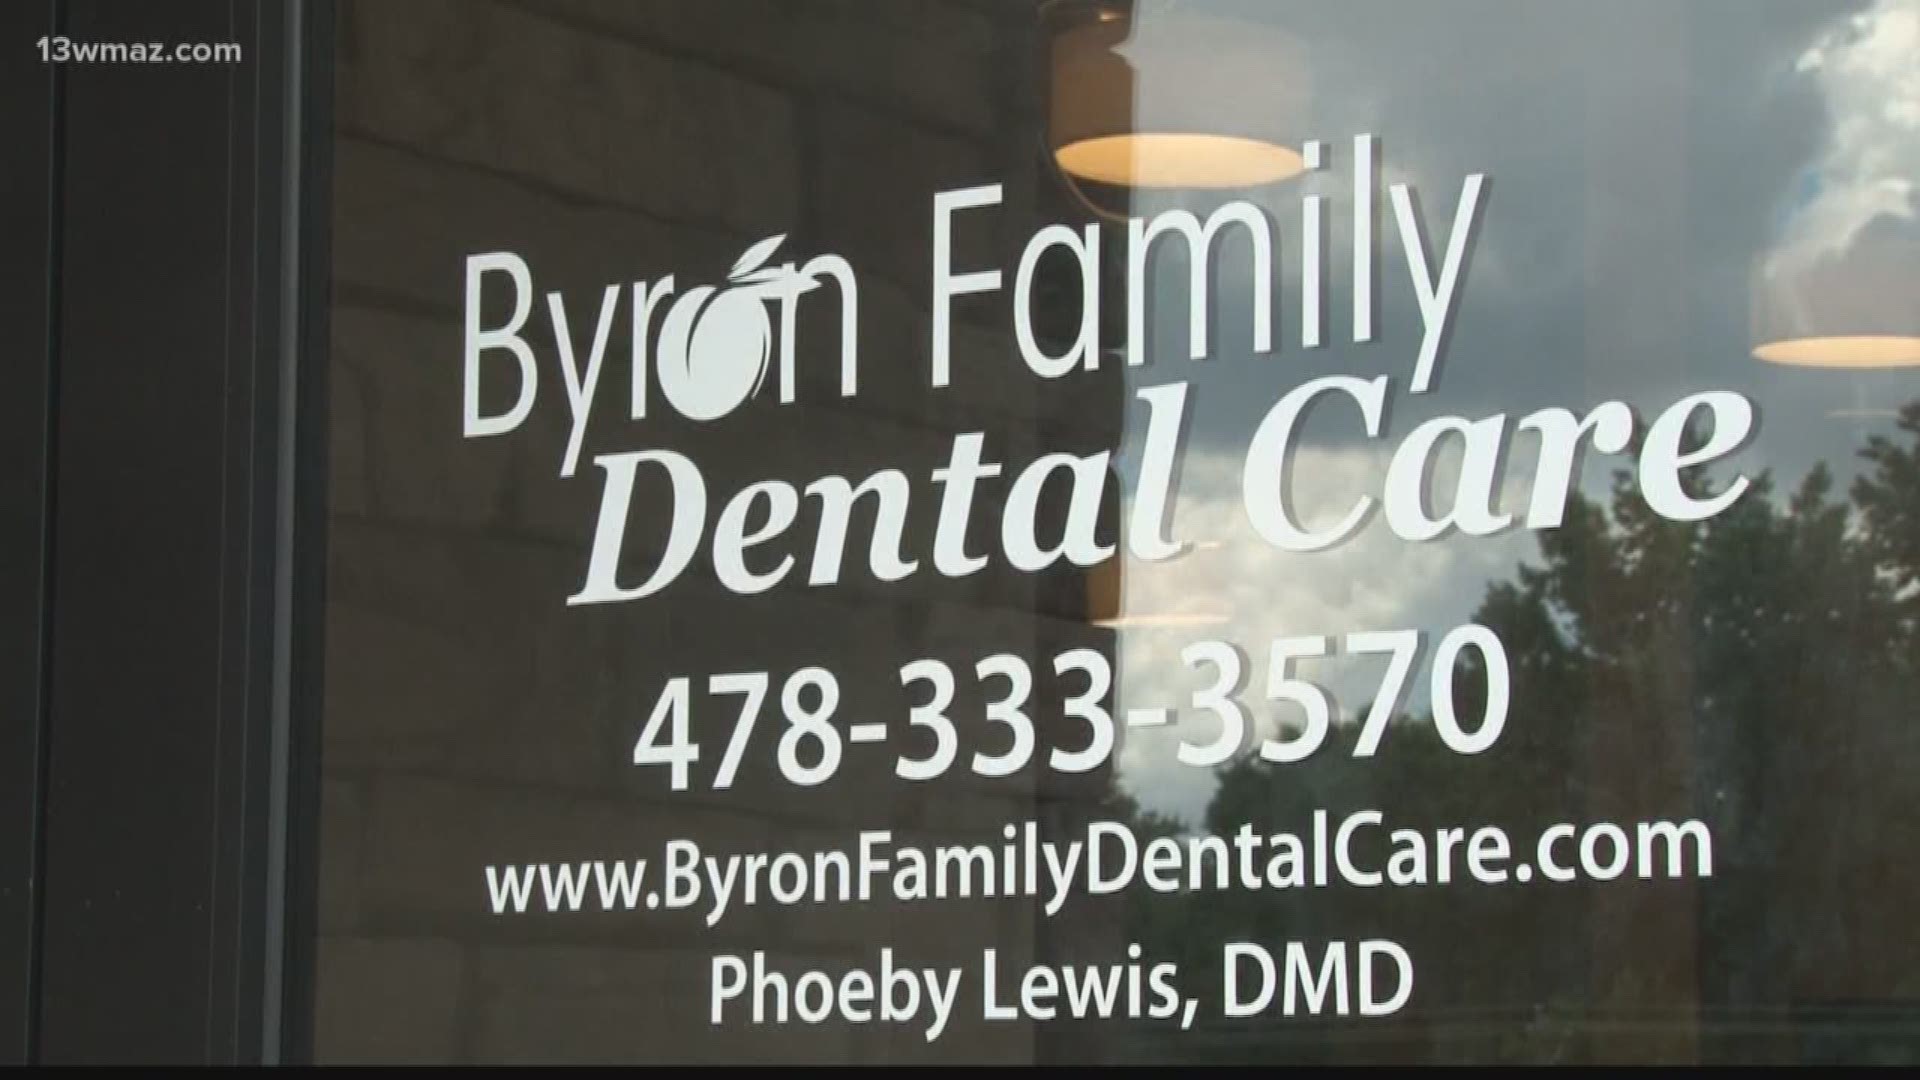 Byron Family Dental in Peach County gave out $15 tooth extractions Saturday. The money went back to both local and national charities.